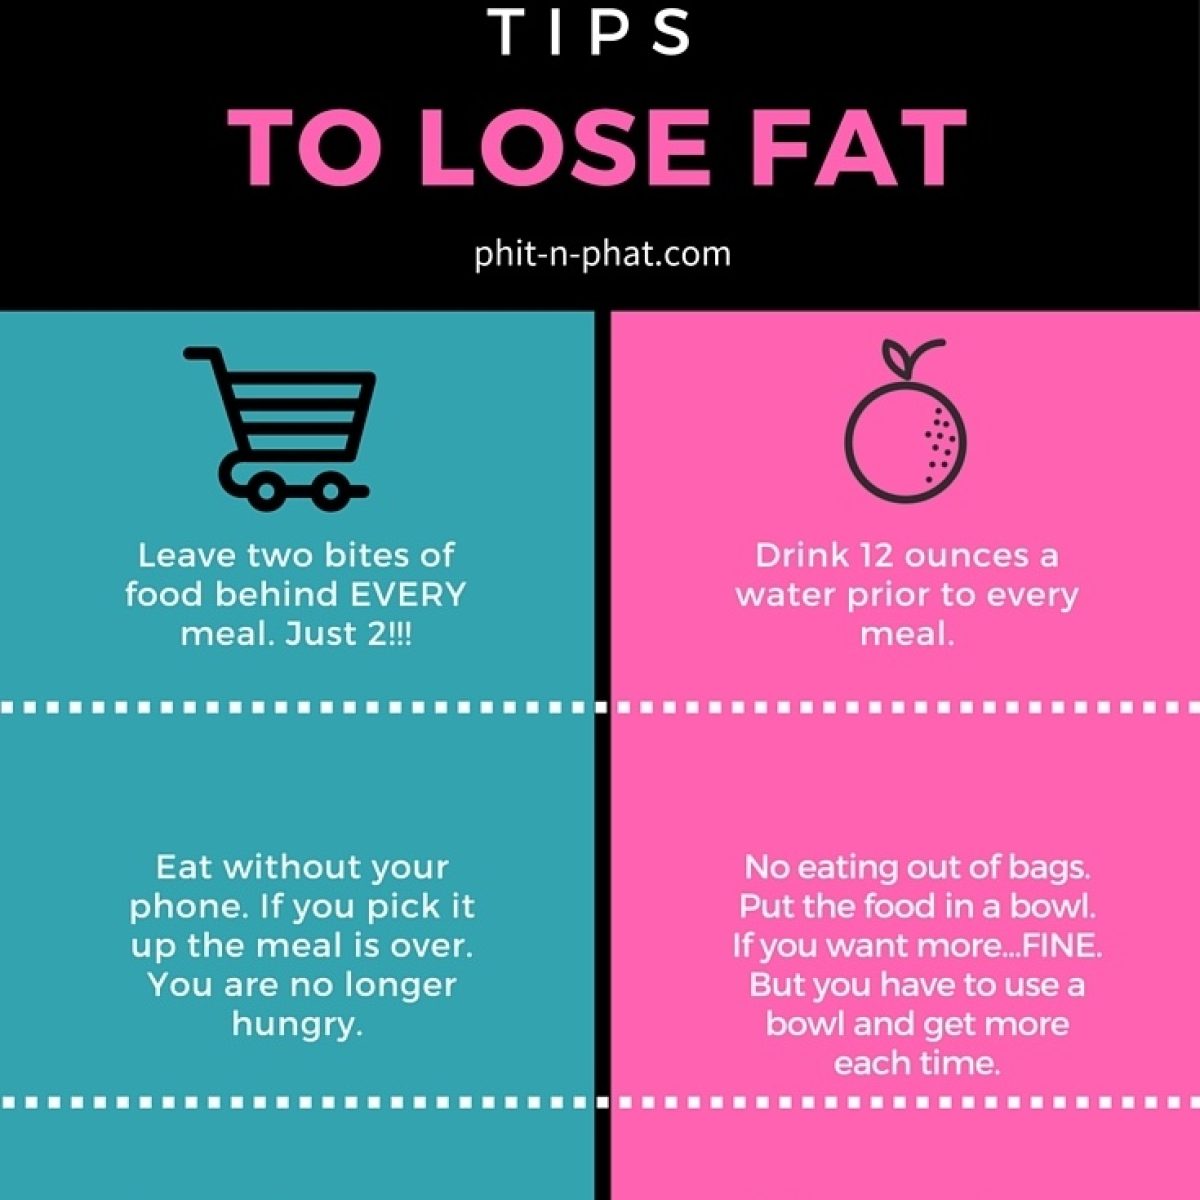 6 easy tips to lose fat and shed pounds.